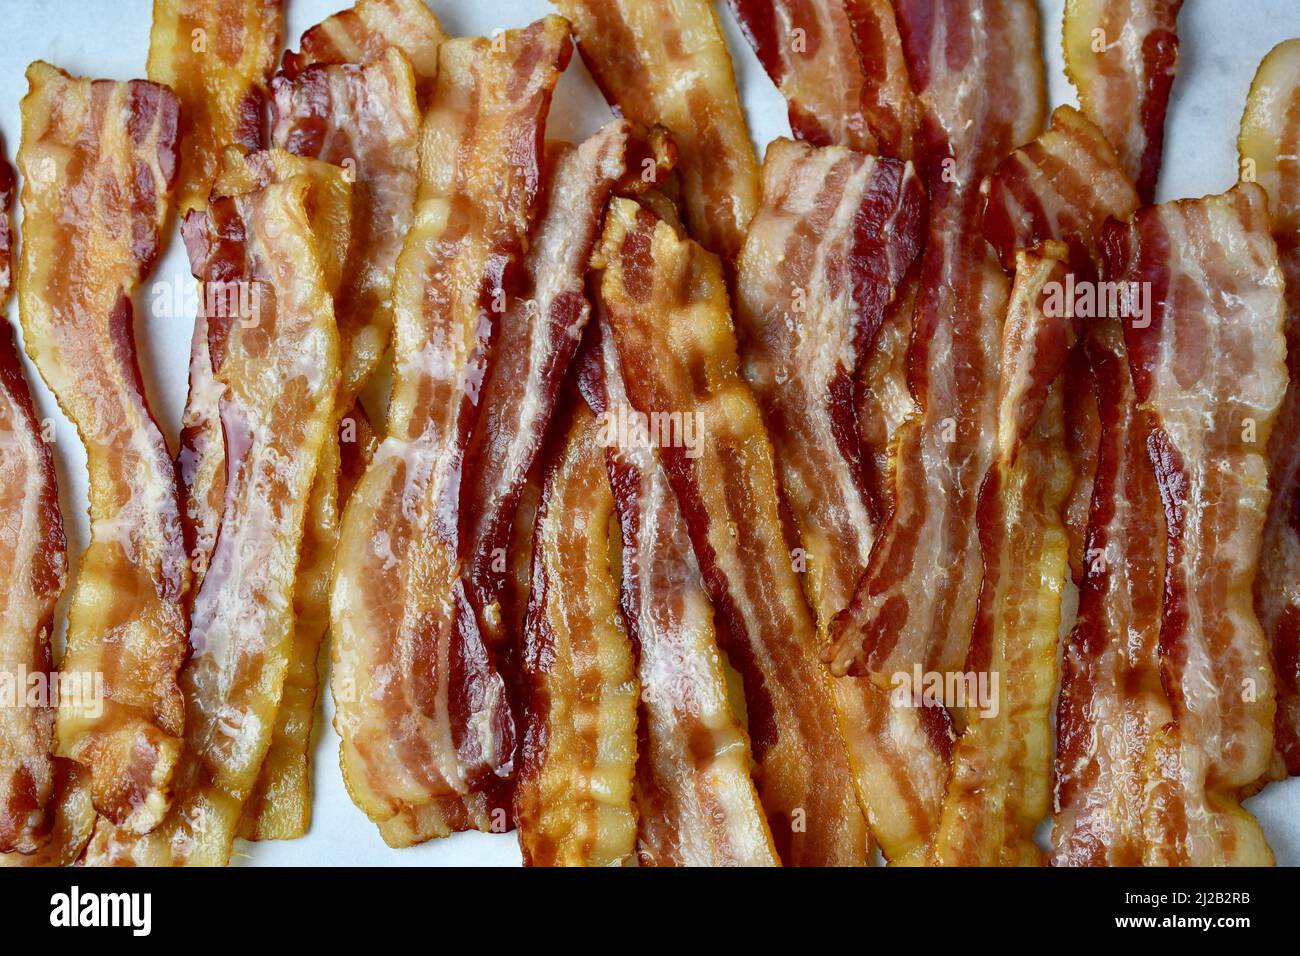 Full frame of bacon, top down view Stock Photo